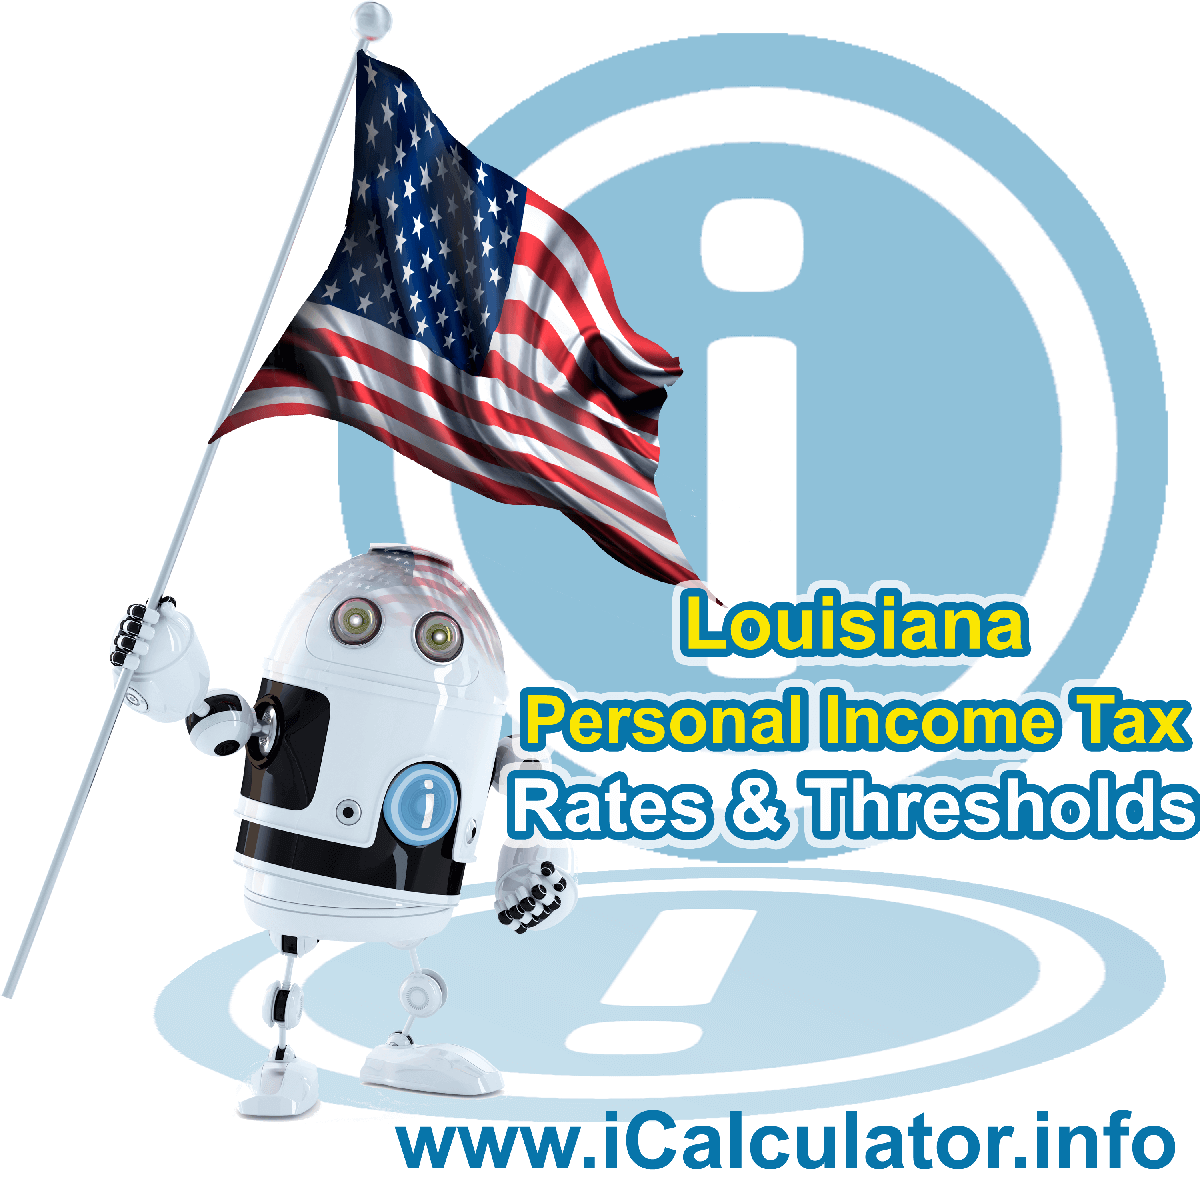 Louisiana State Tax Tables 2015. This image displays details of the Louisiana State Tax Tables for the 2015 tax return year which is provided in support of the 2015 US Tax Calculator